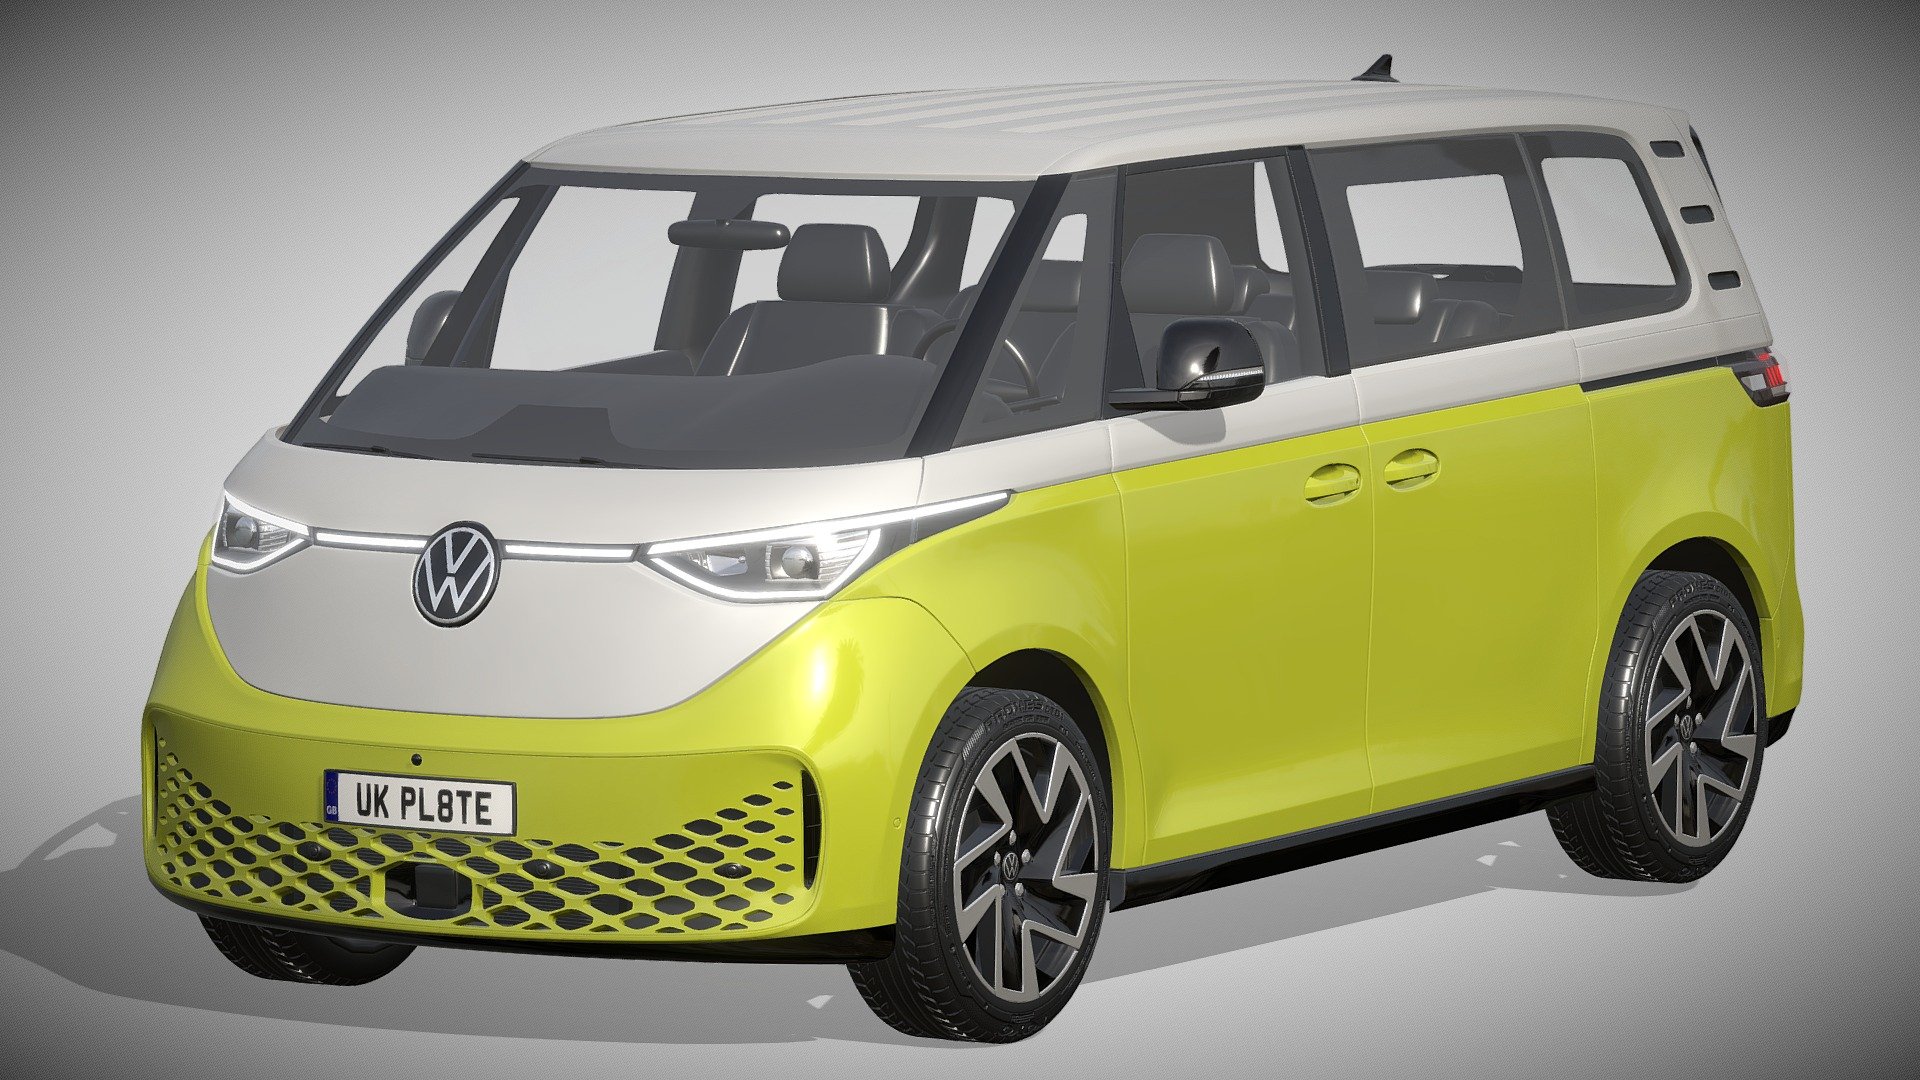 Volkswagen ID. Buzz 2023

https://www.volkswagen-nutzfahrzeuge.de/de/modelle/id-buzz.html

Clean geometry Light weight model, yet completely detailed for HI-Res renders. Use for movies, Advertisements or games

Corona render and materials

All textures include in *.rar files

Lighting setup is not included in the file! - Volkswagen ID Buzz 2023 - Buy Royalty Free 3D model by zifir3d 3d model